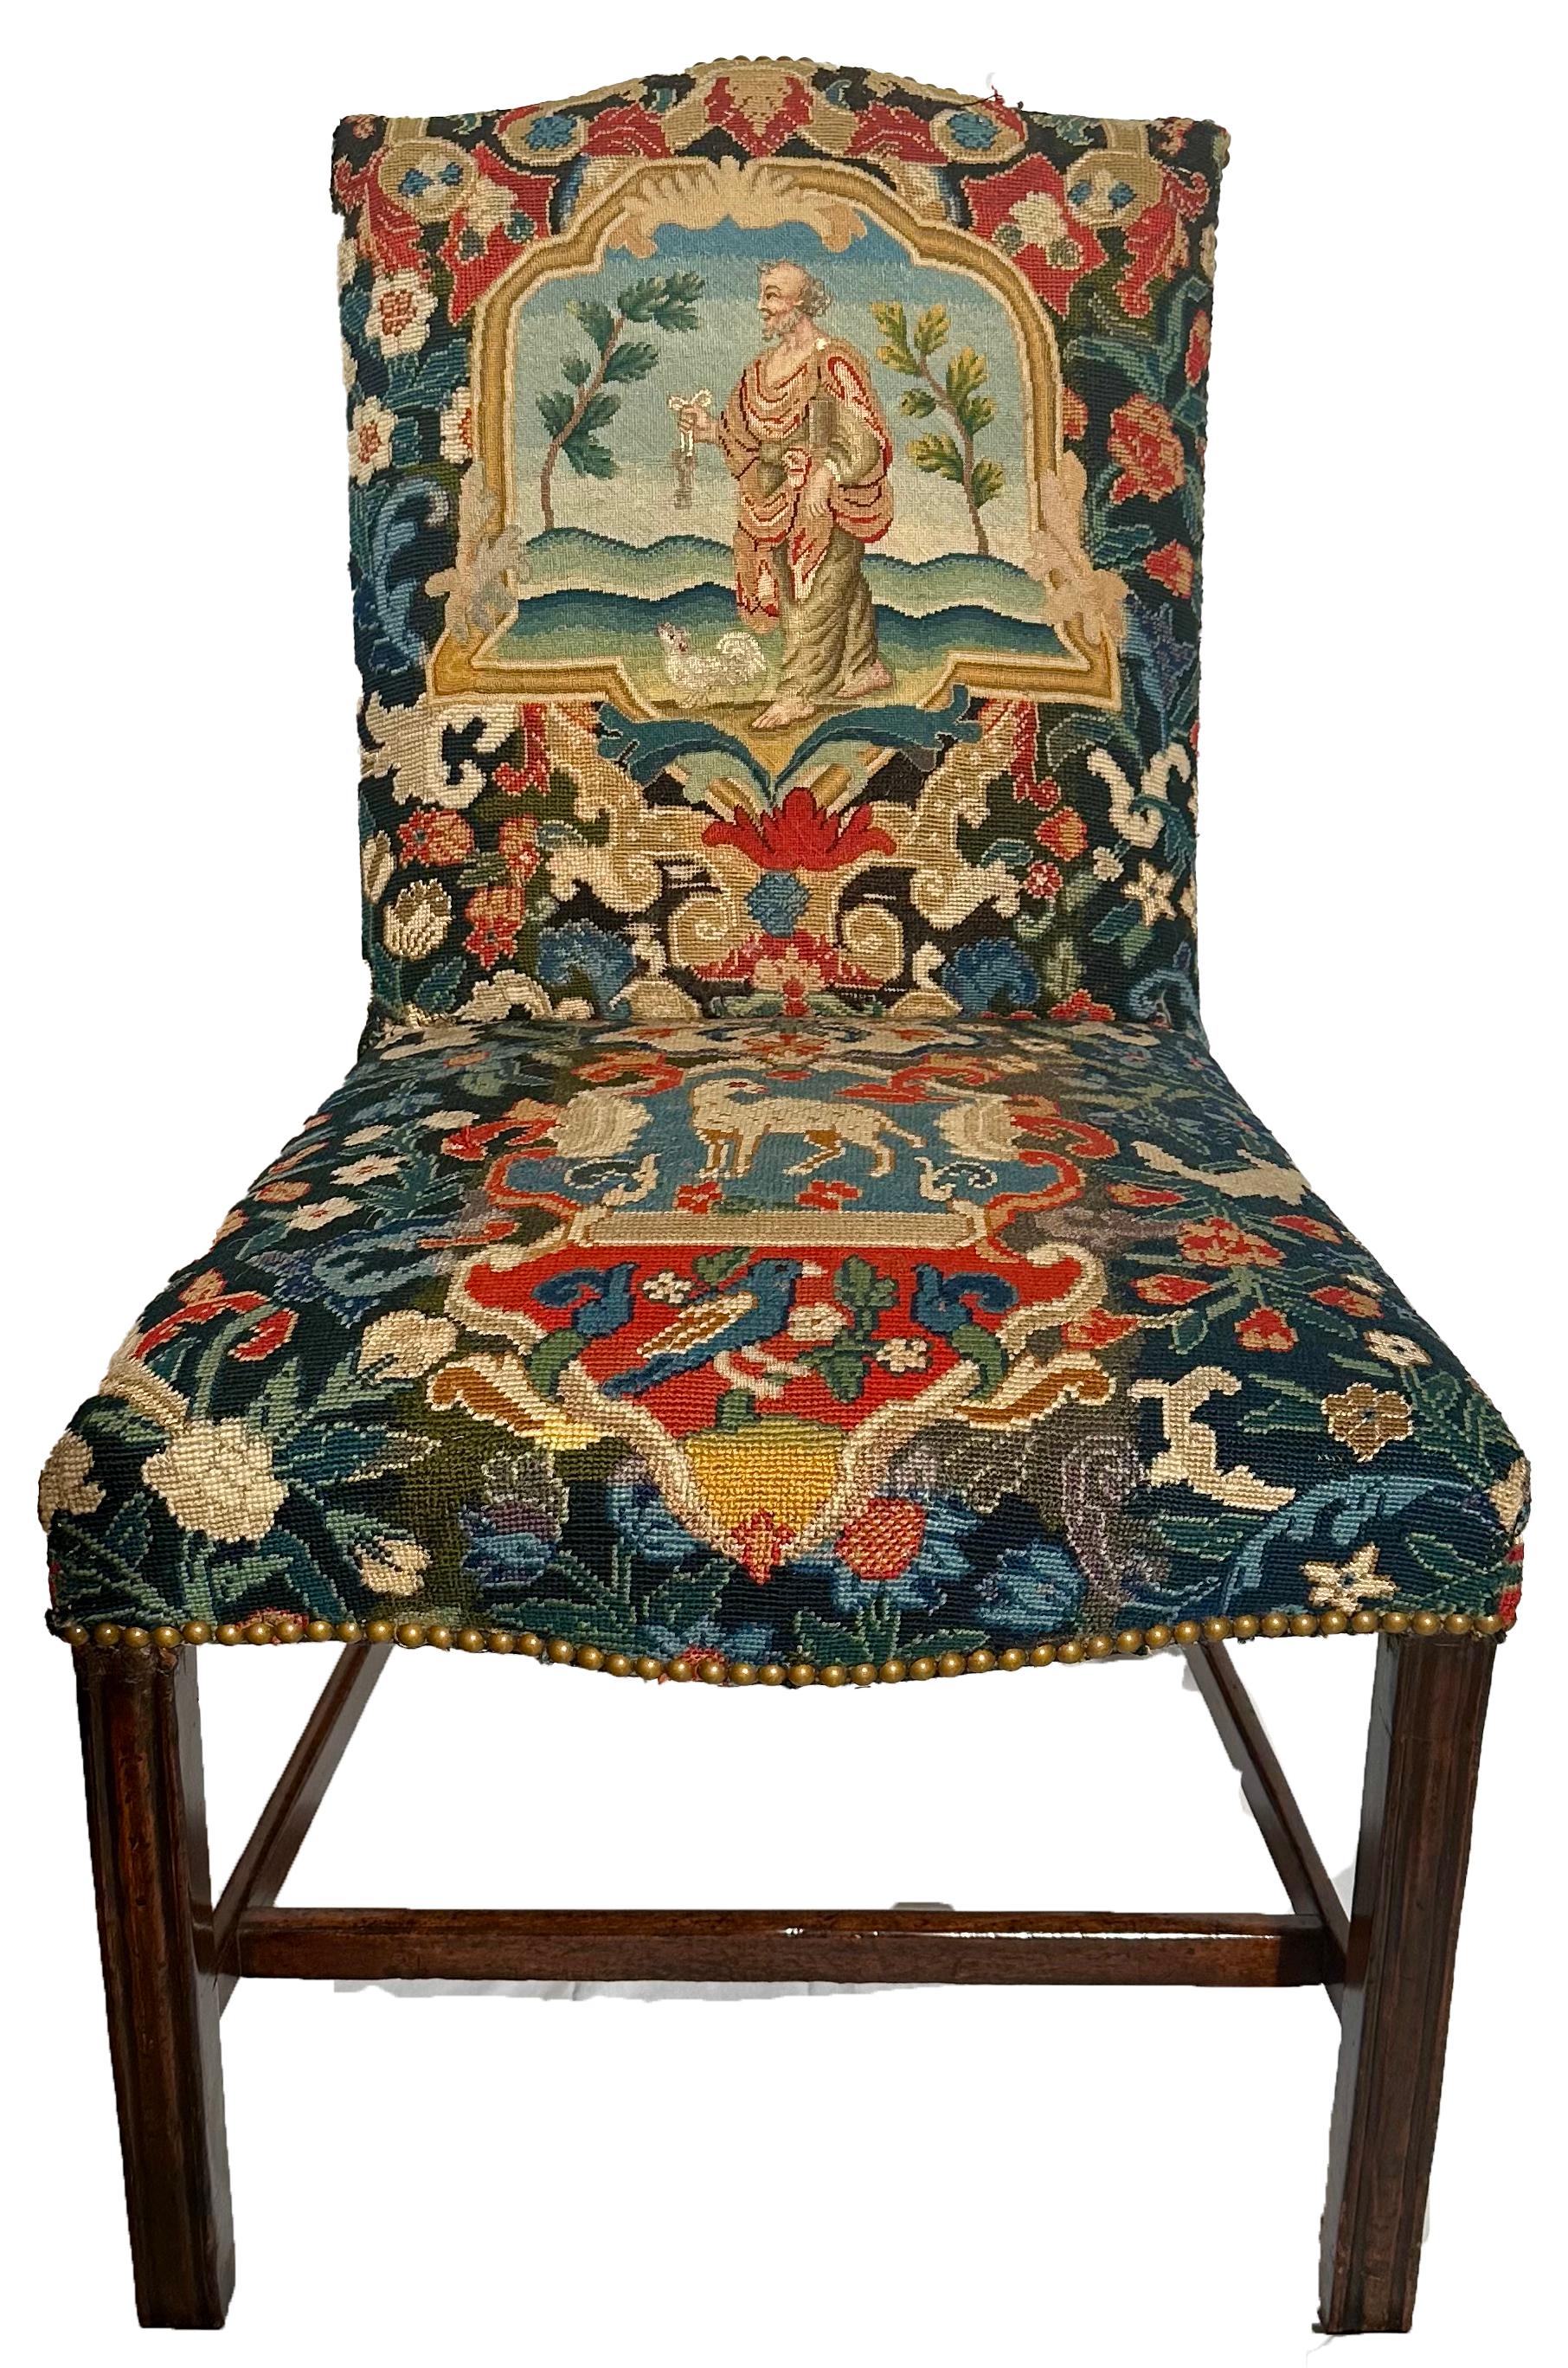 Set of 10 Antique English Georgian Mahogany and Needlepoint Chairs, Circa 1820's For Sale 4